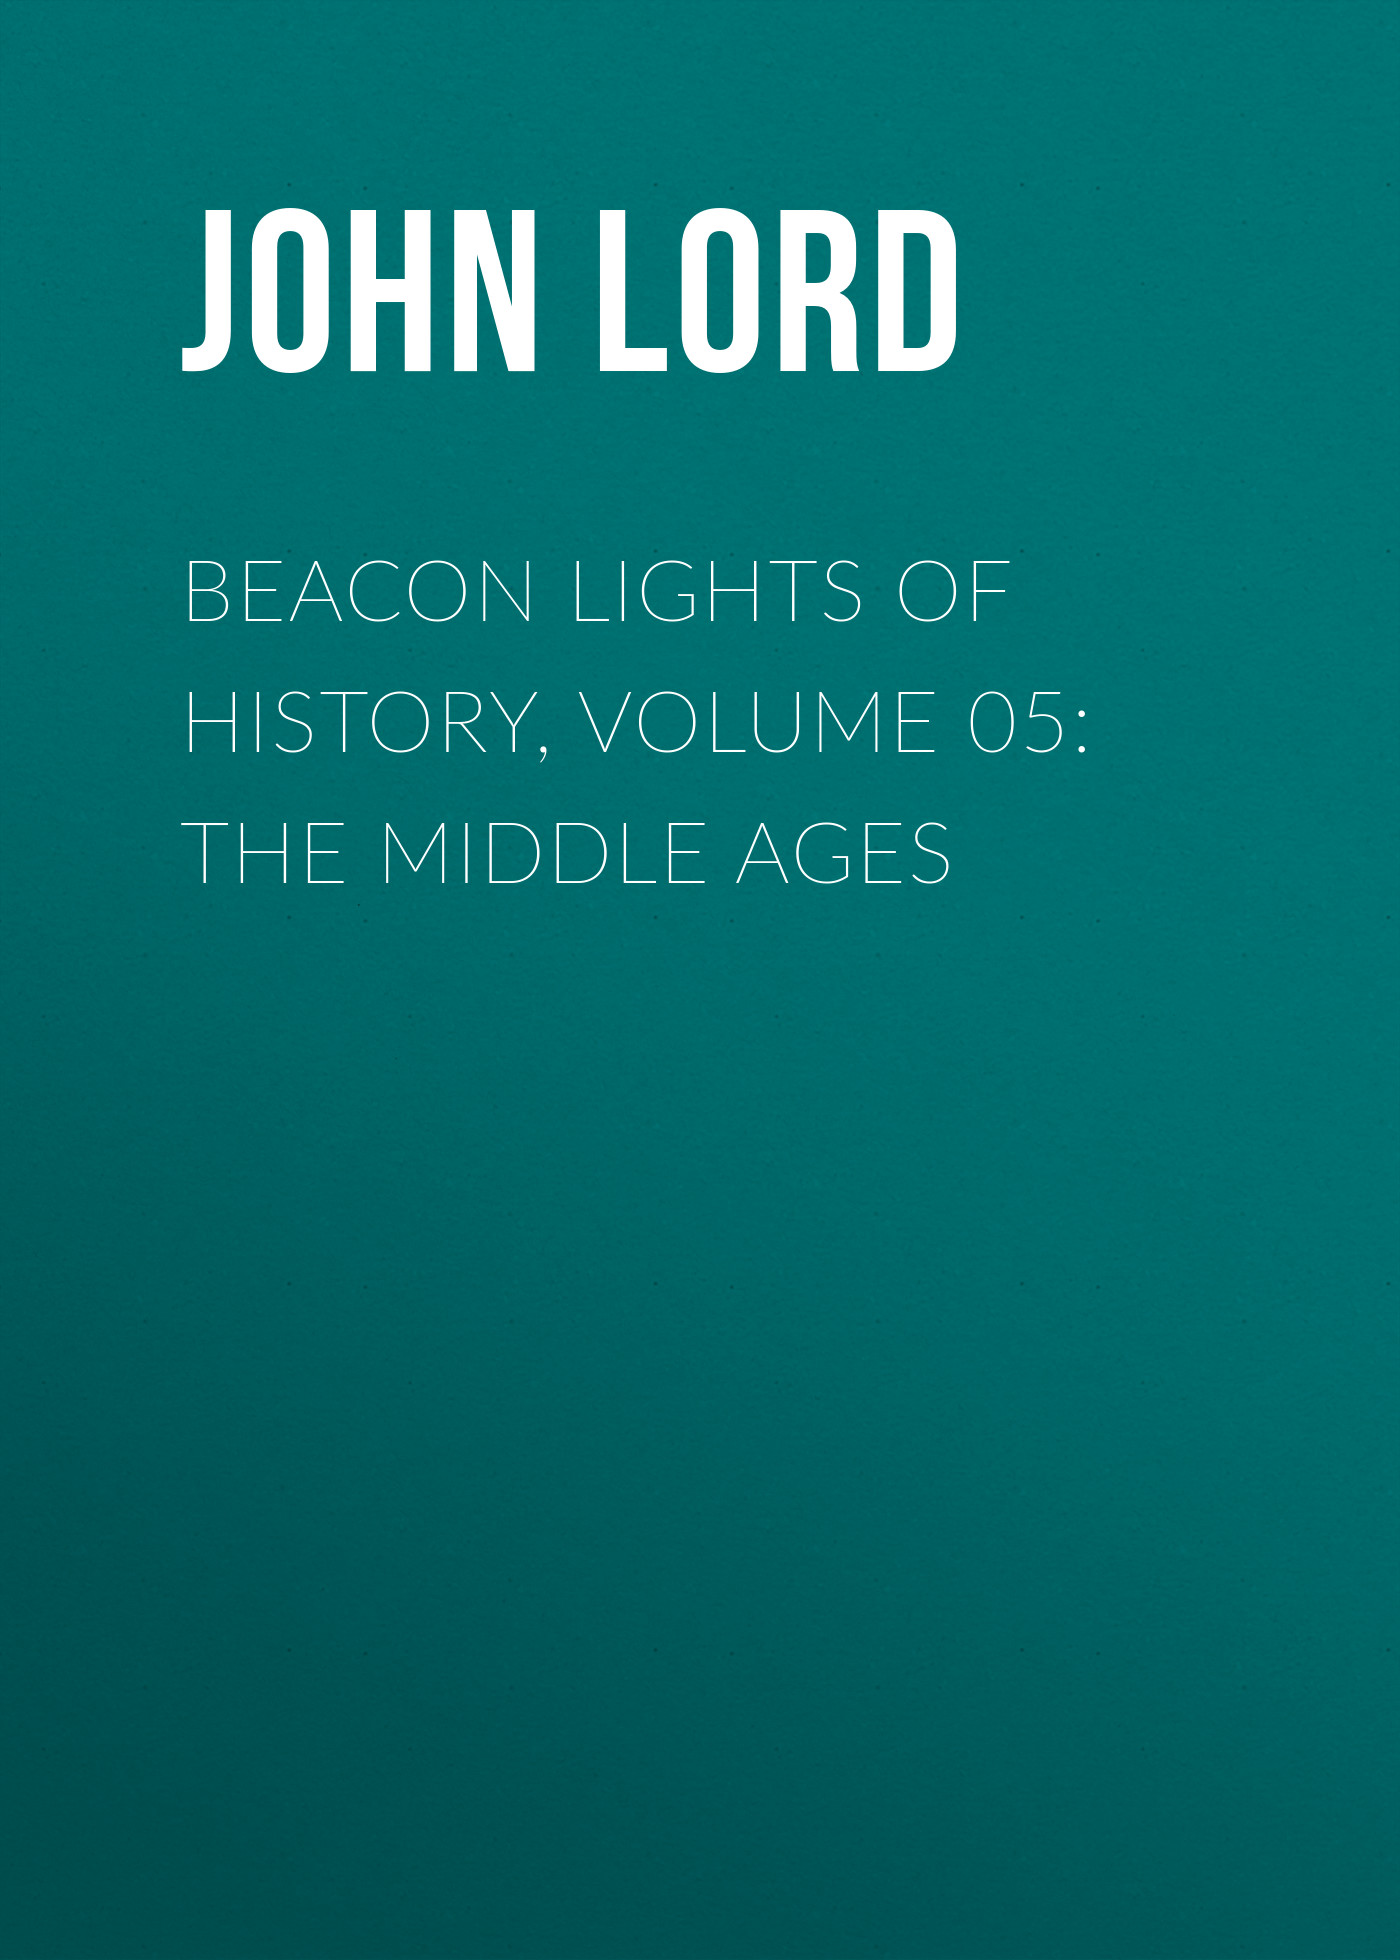 Beacon Lights of History, Volume 05: The Middle Ages